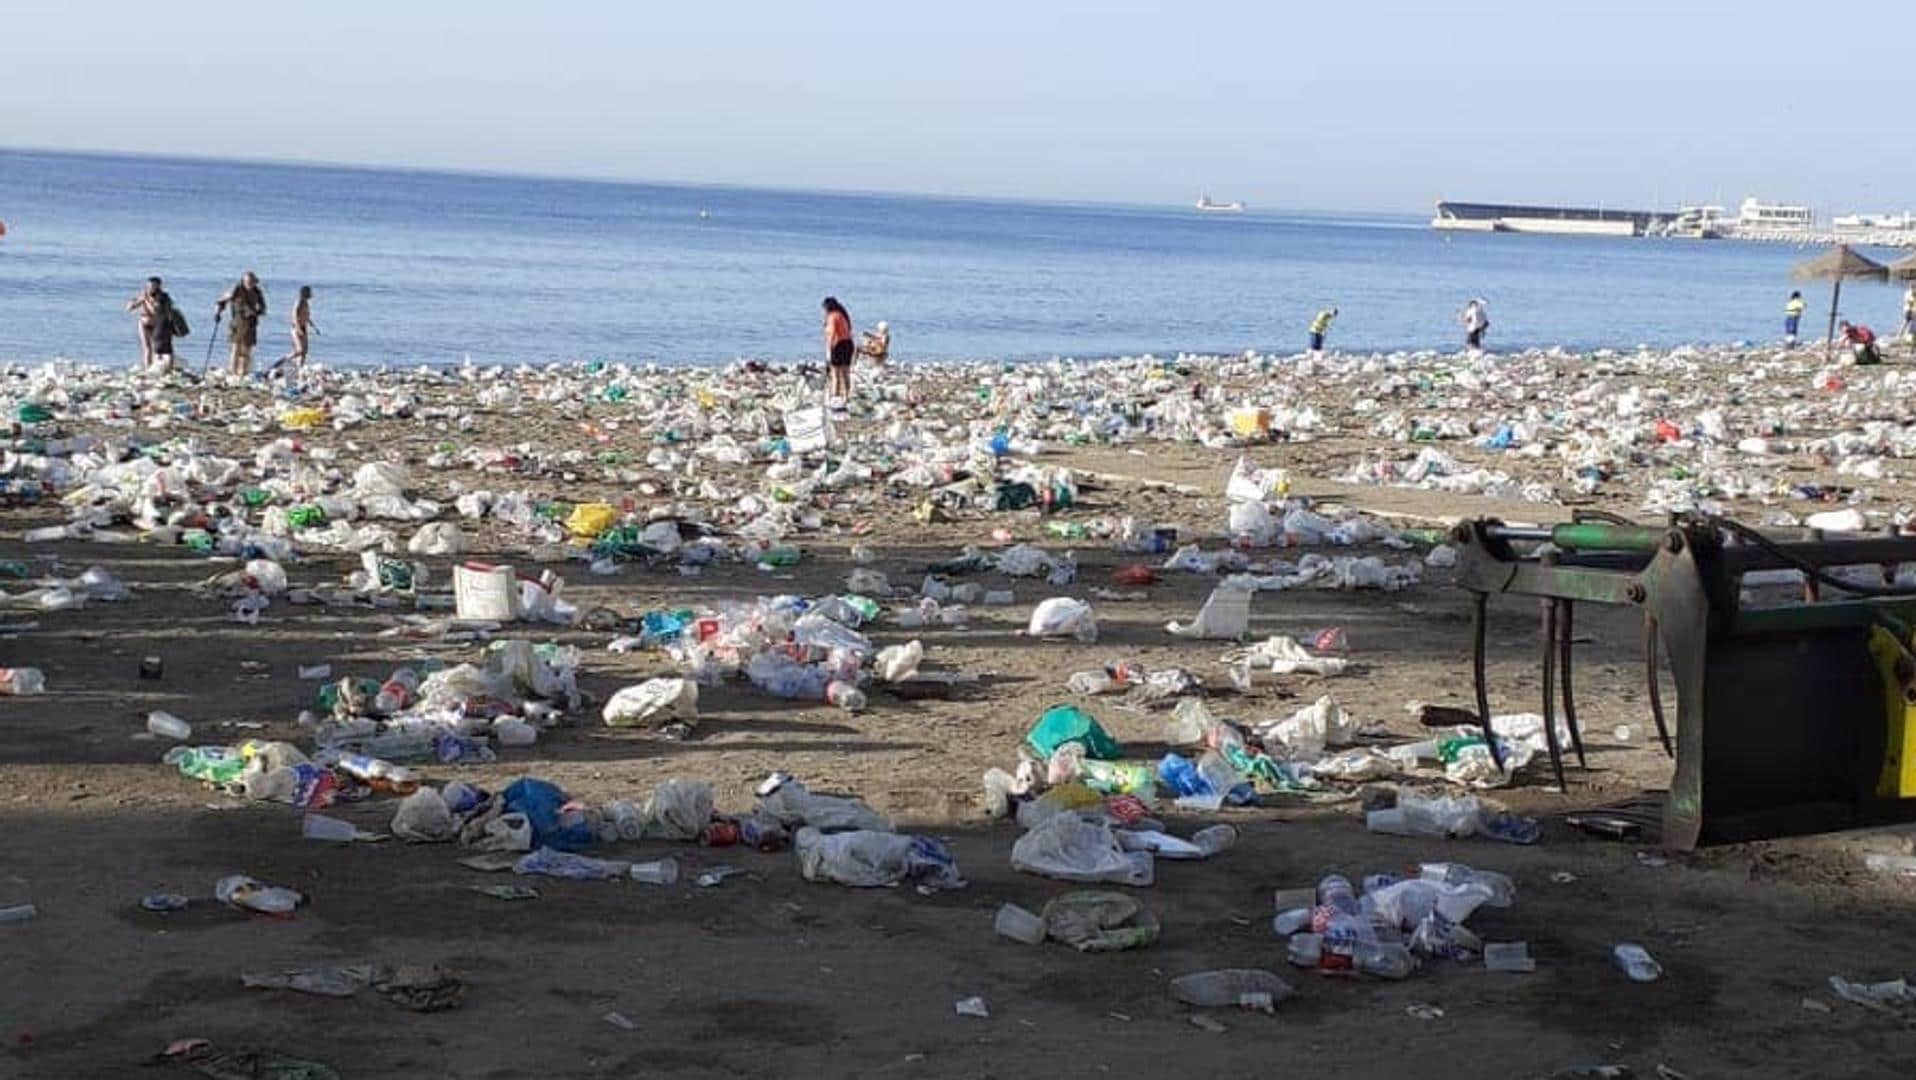 Antilitter campaign launched for Malaga's beaches to prevent a repeat